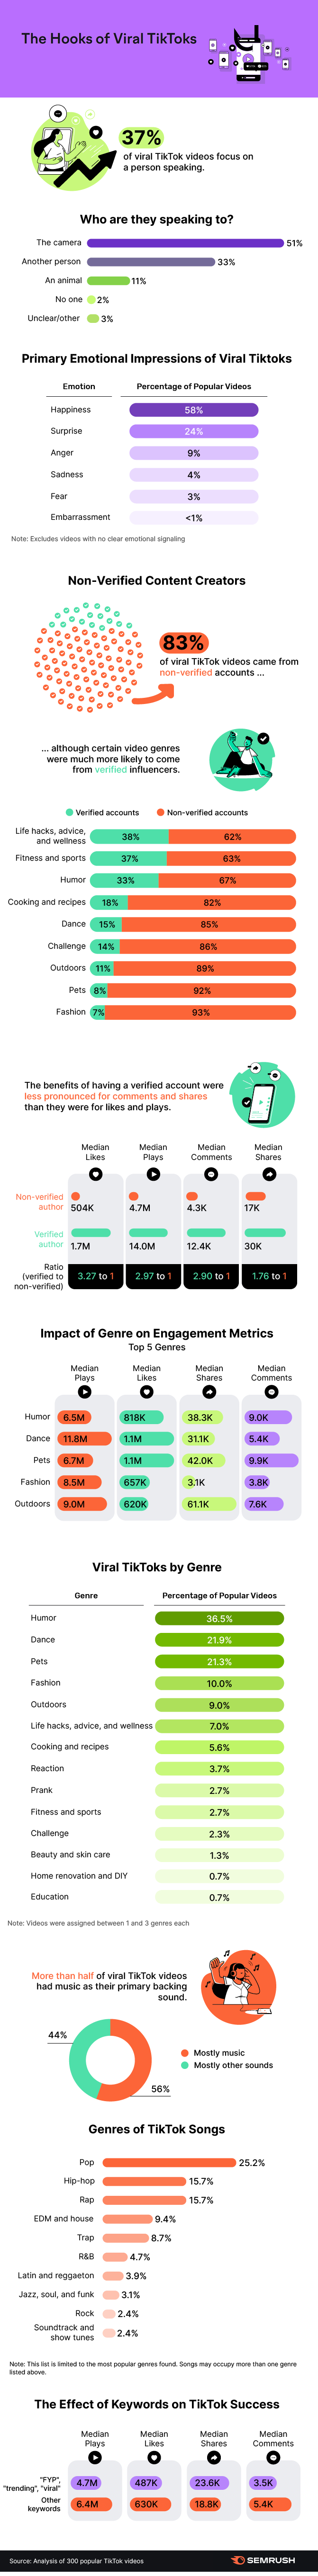 new study highlights key trends and traits in viral tiktok content infographic